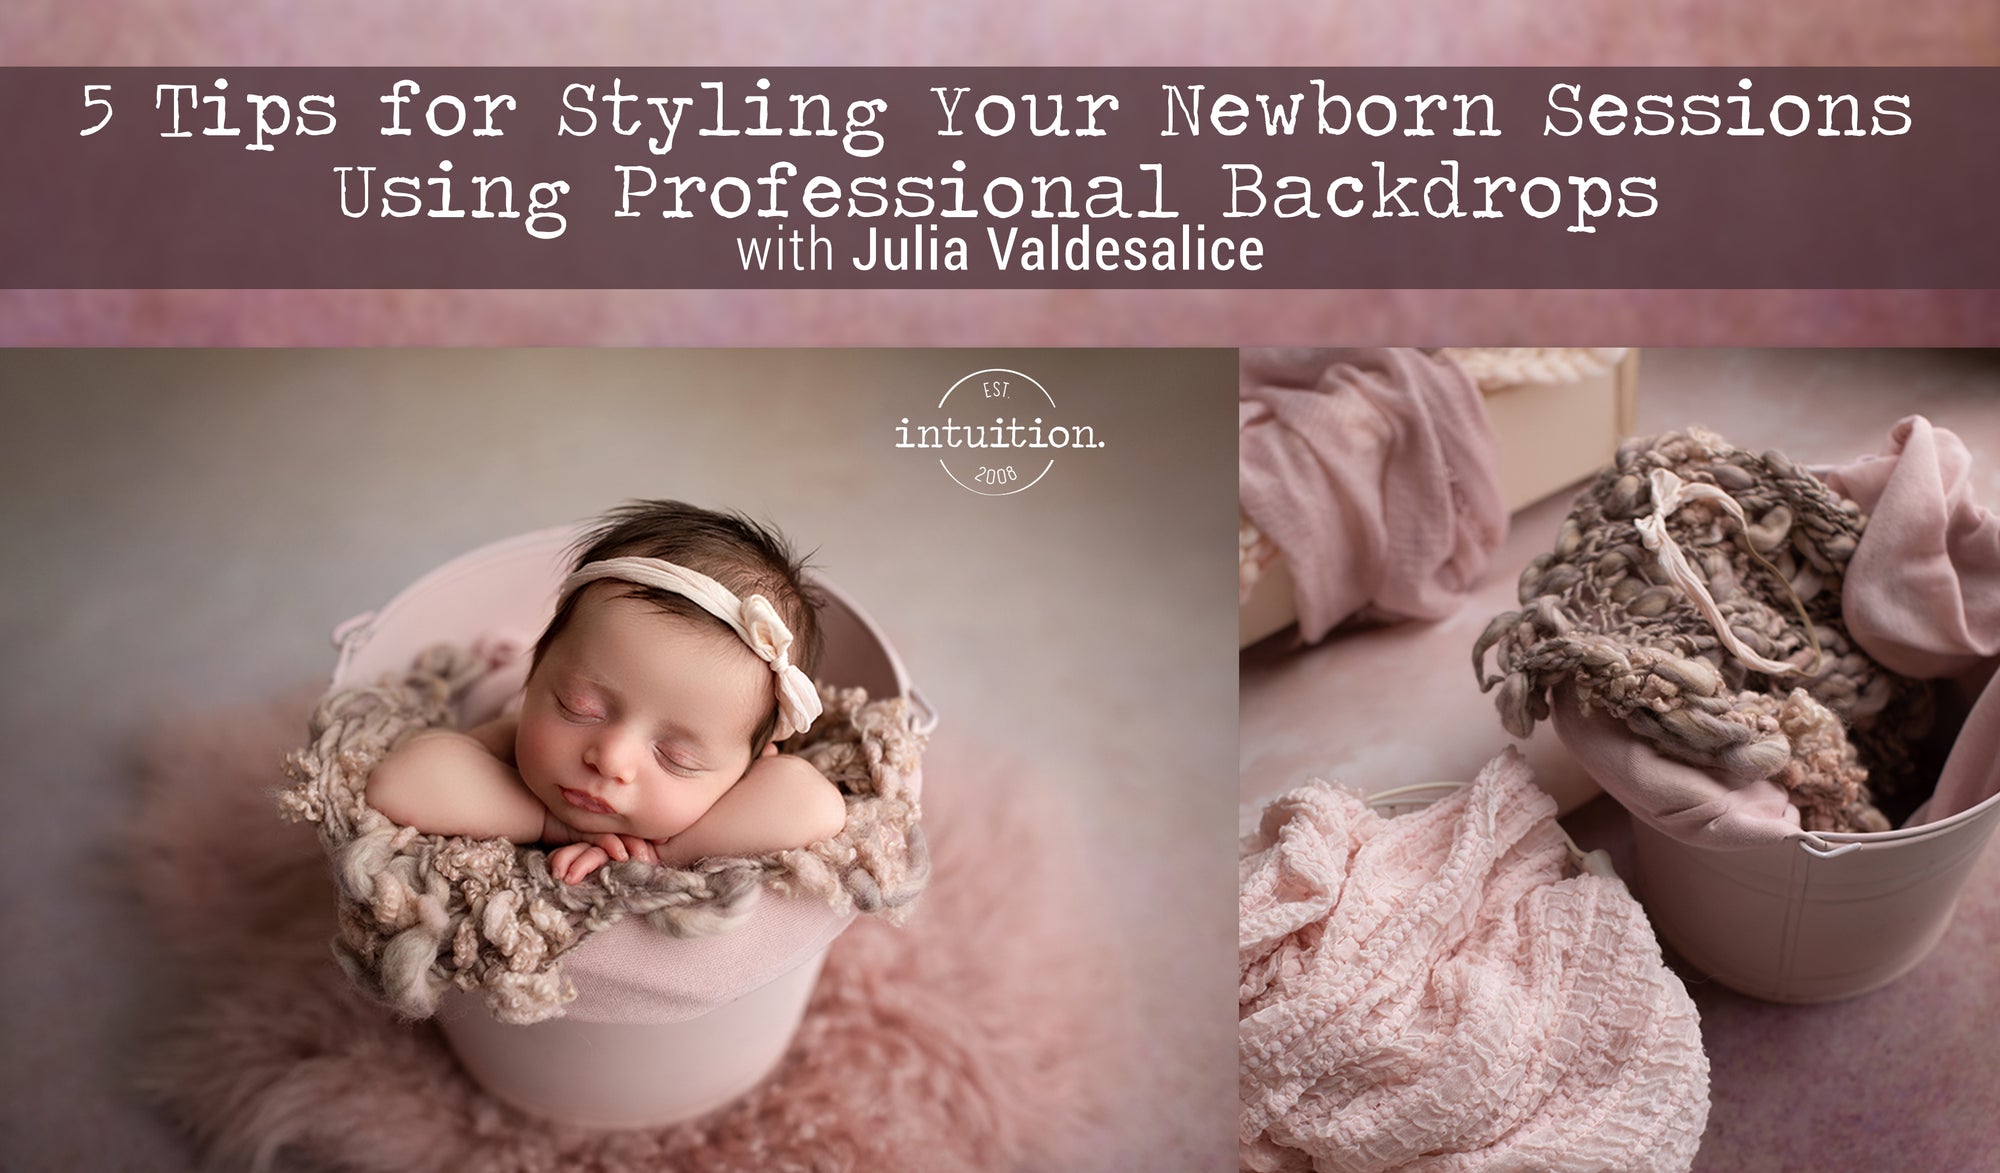 5 Tips for Styling Your Newborn Sessions Using Professional Backdrops with Julia Valdesalice